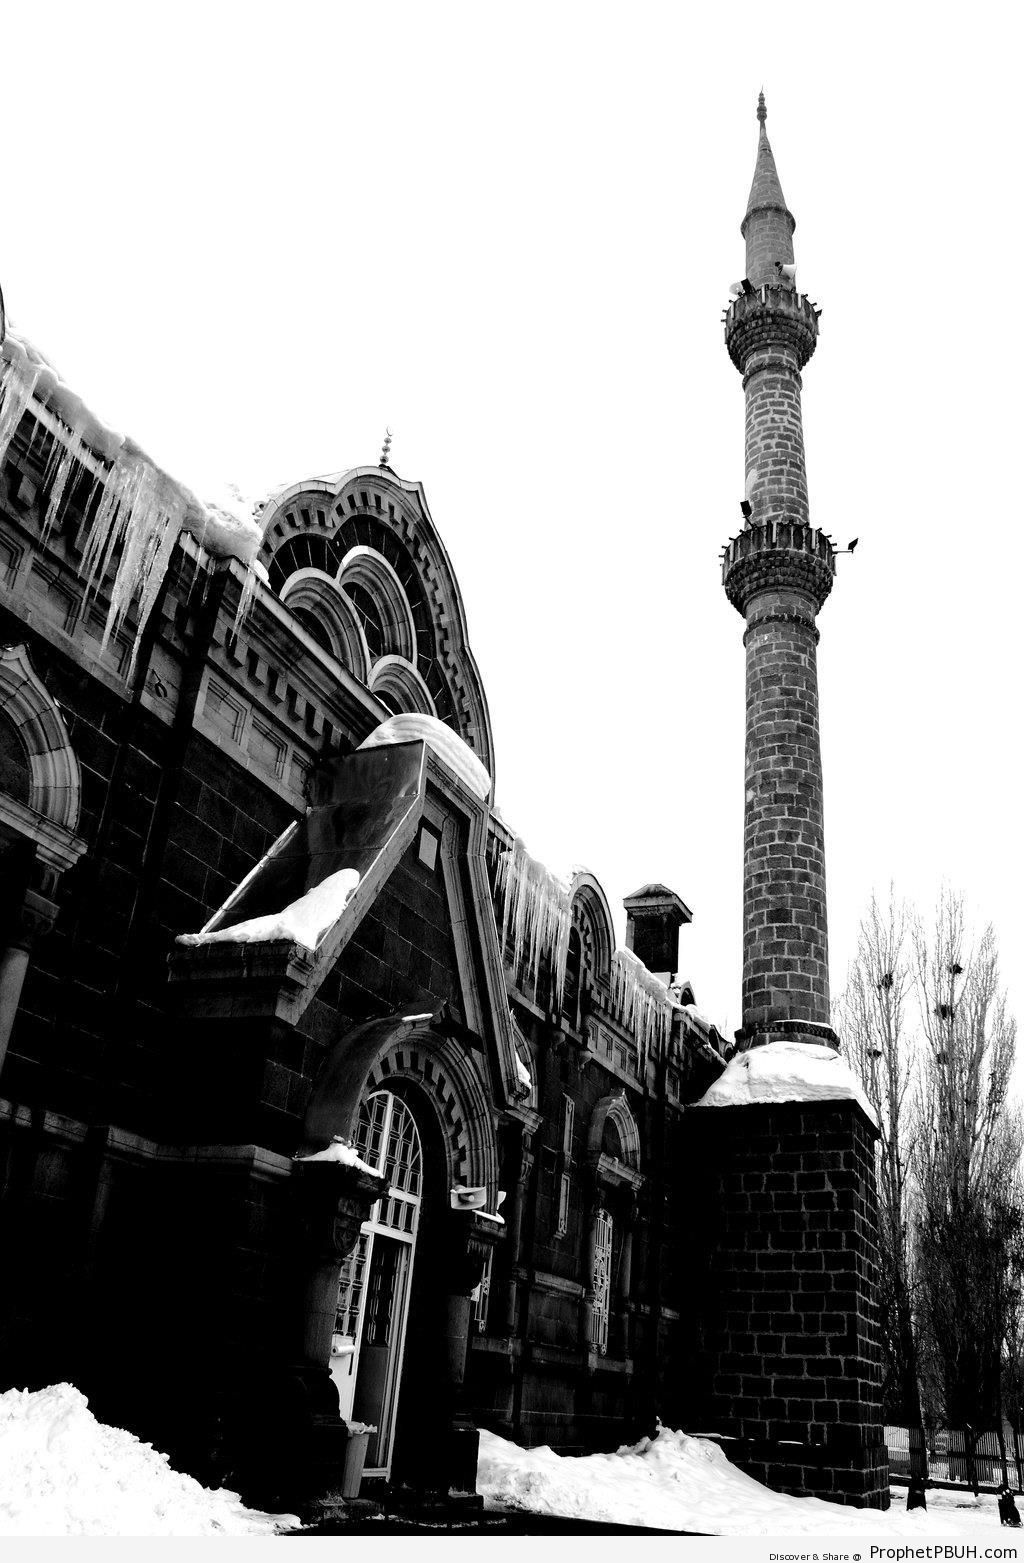 Fethiye Mosque in Kars, Turkey - Fethiye Mosque in Kars, Turkey -Picture